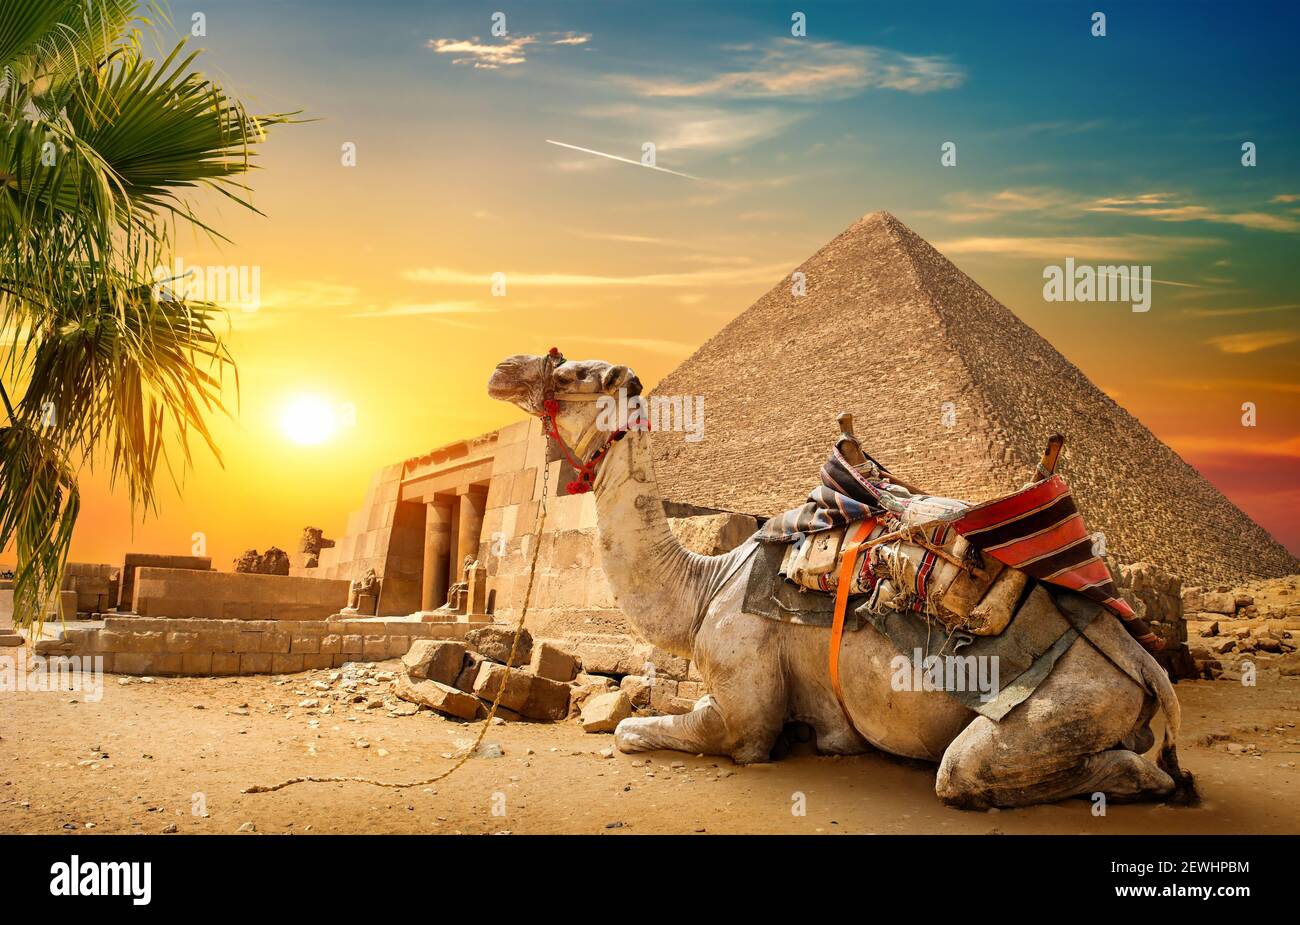 Camel rests near ruins pyramid of Egypt. Stock Photo